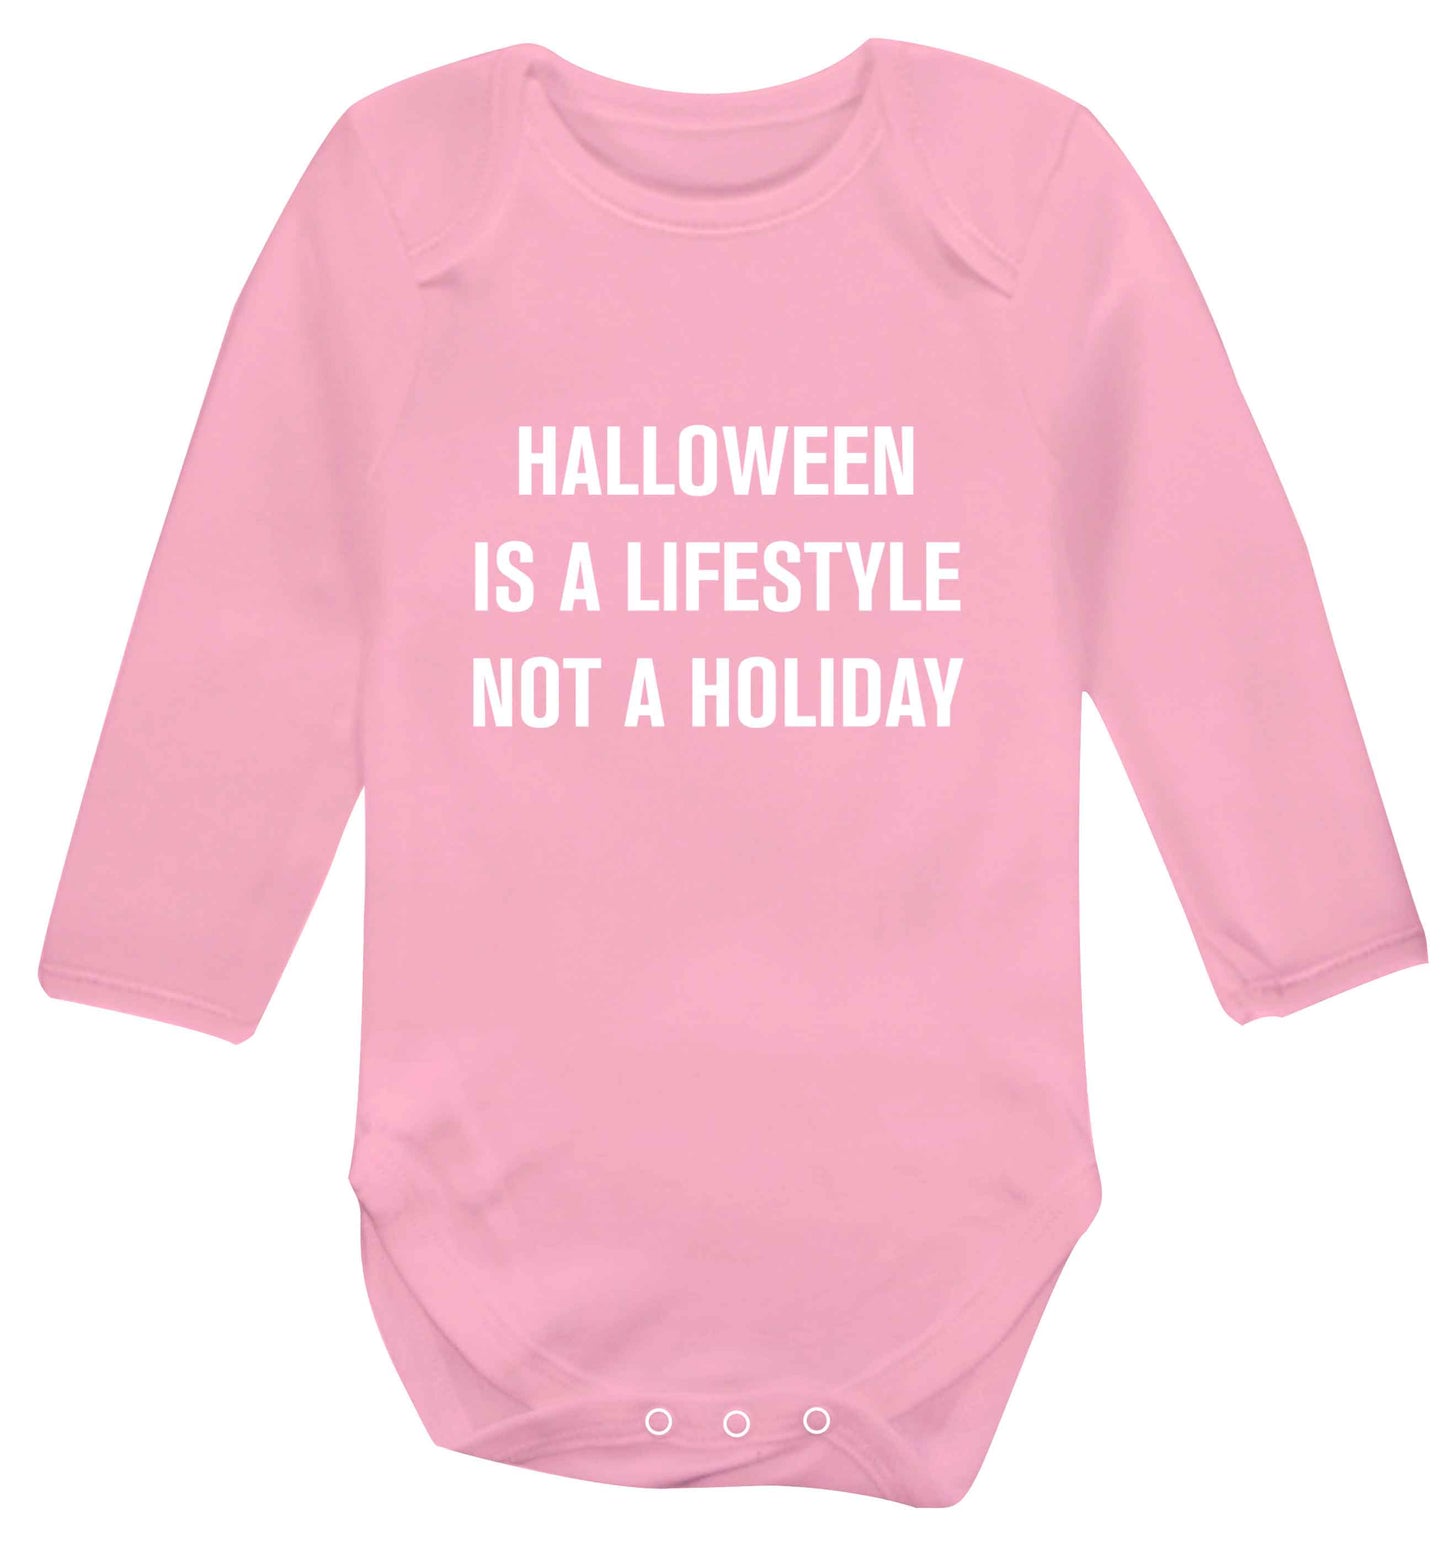 Halloween is a lifestyle not a holiday baby vest long sleeved pale pink 6-12 months